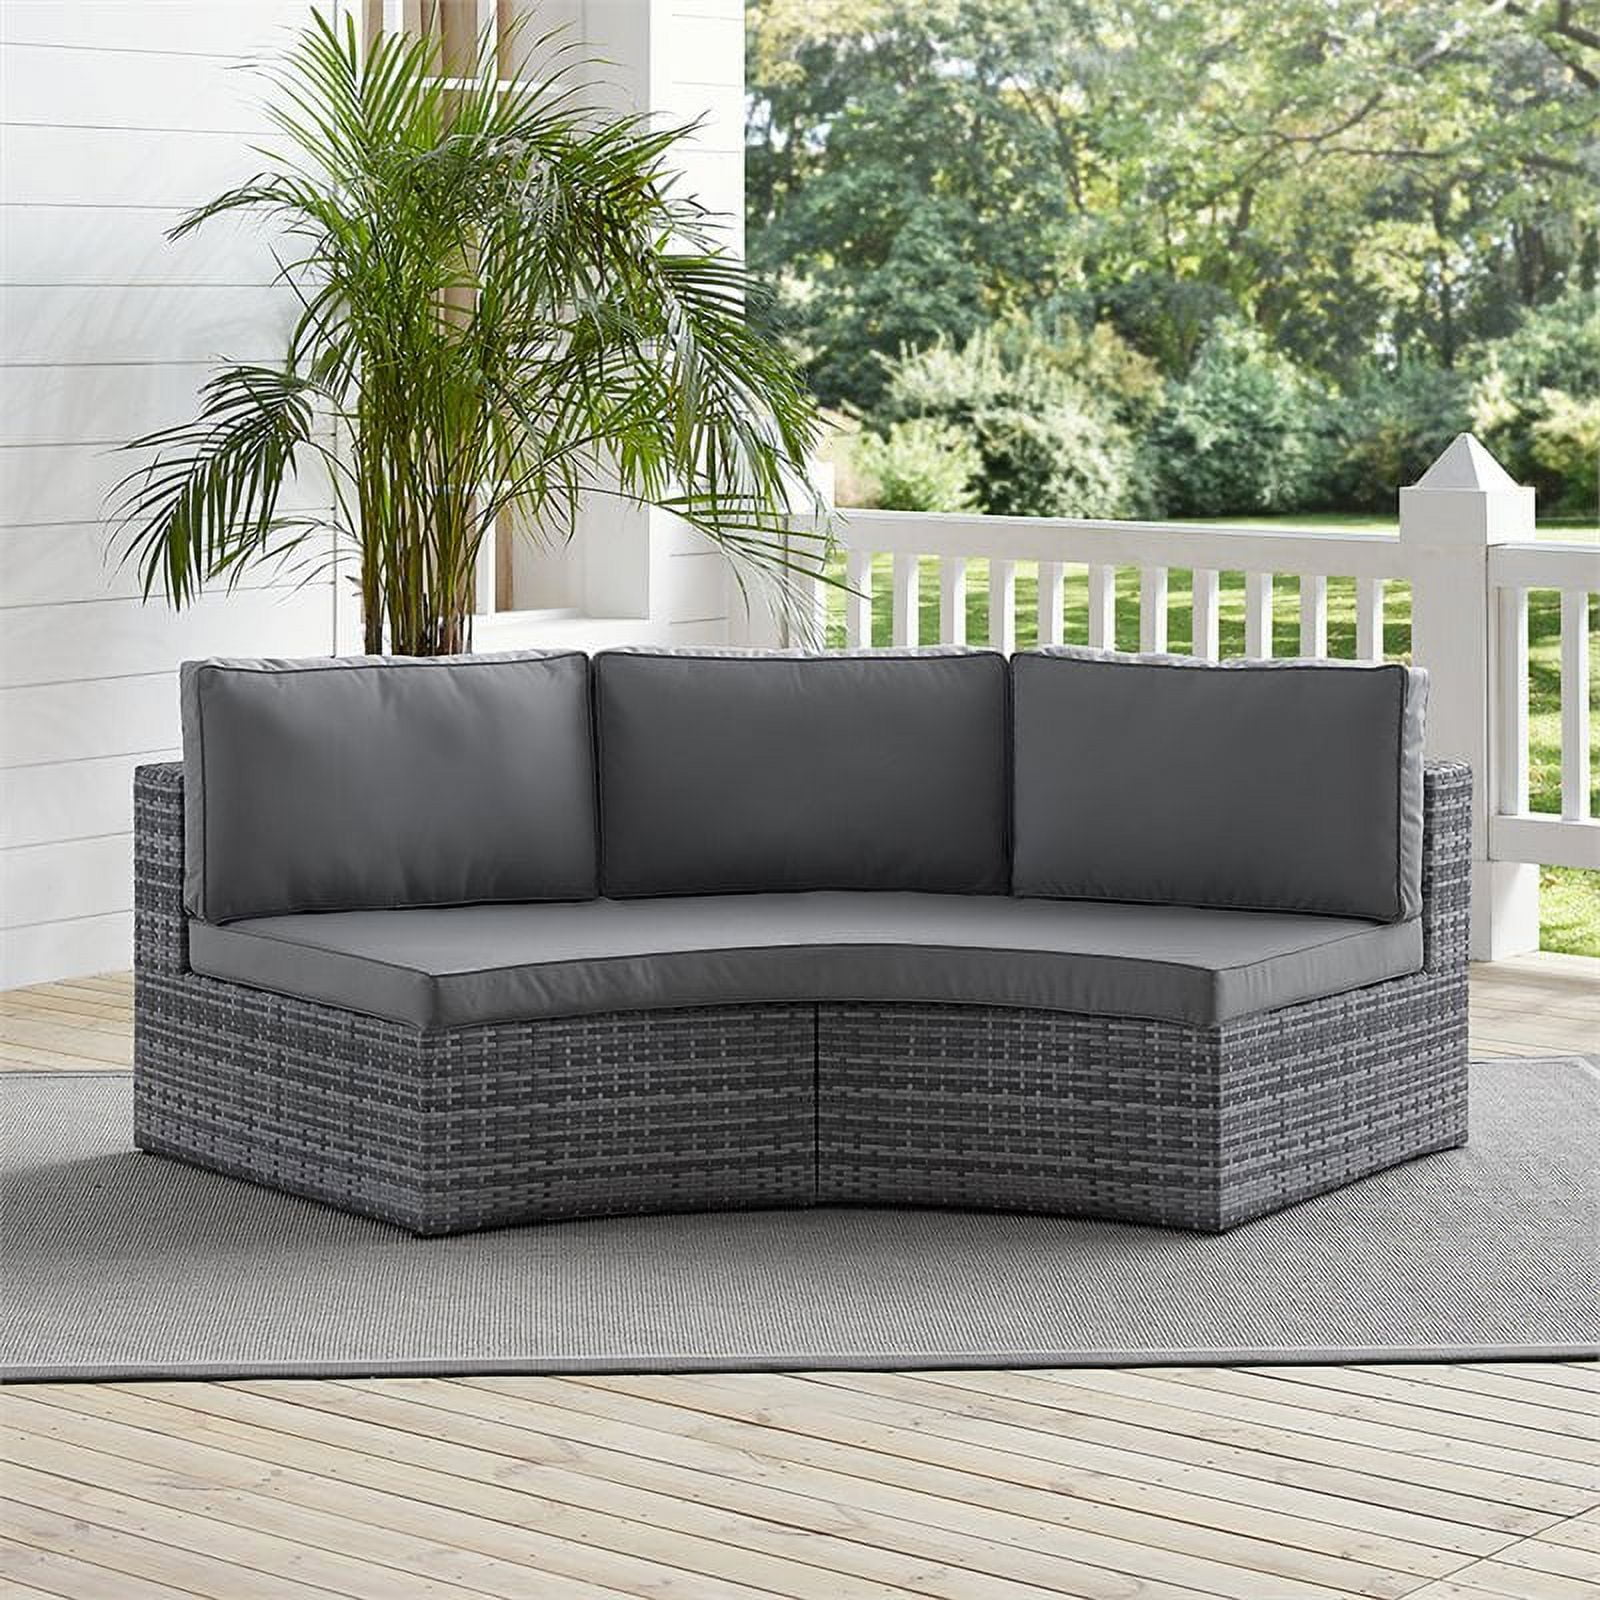 Afuera Living Outdoor Wicker Curved